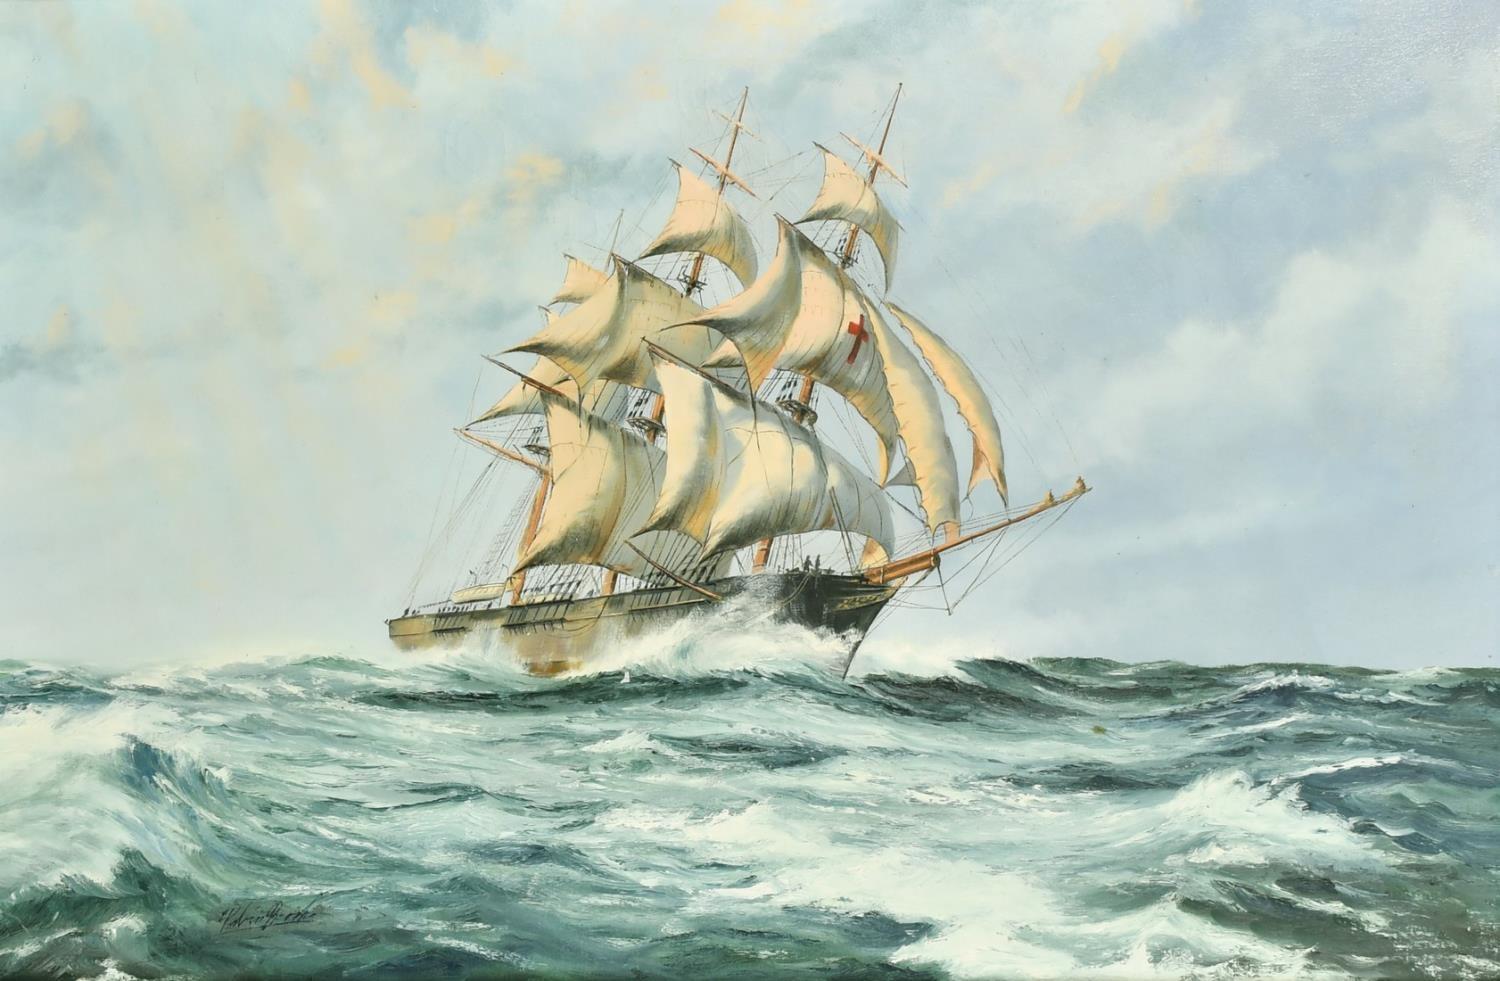 Robin Brooks Landscape Painting - Large British Marine Oil Painting The Dreadnought Clipper Sailing in High Seas